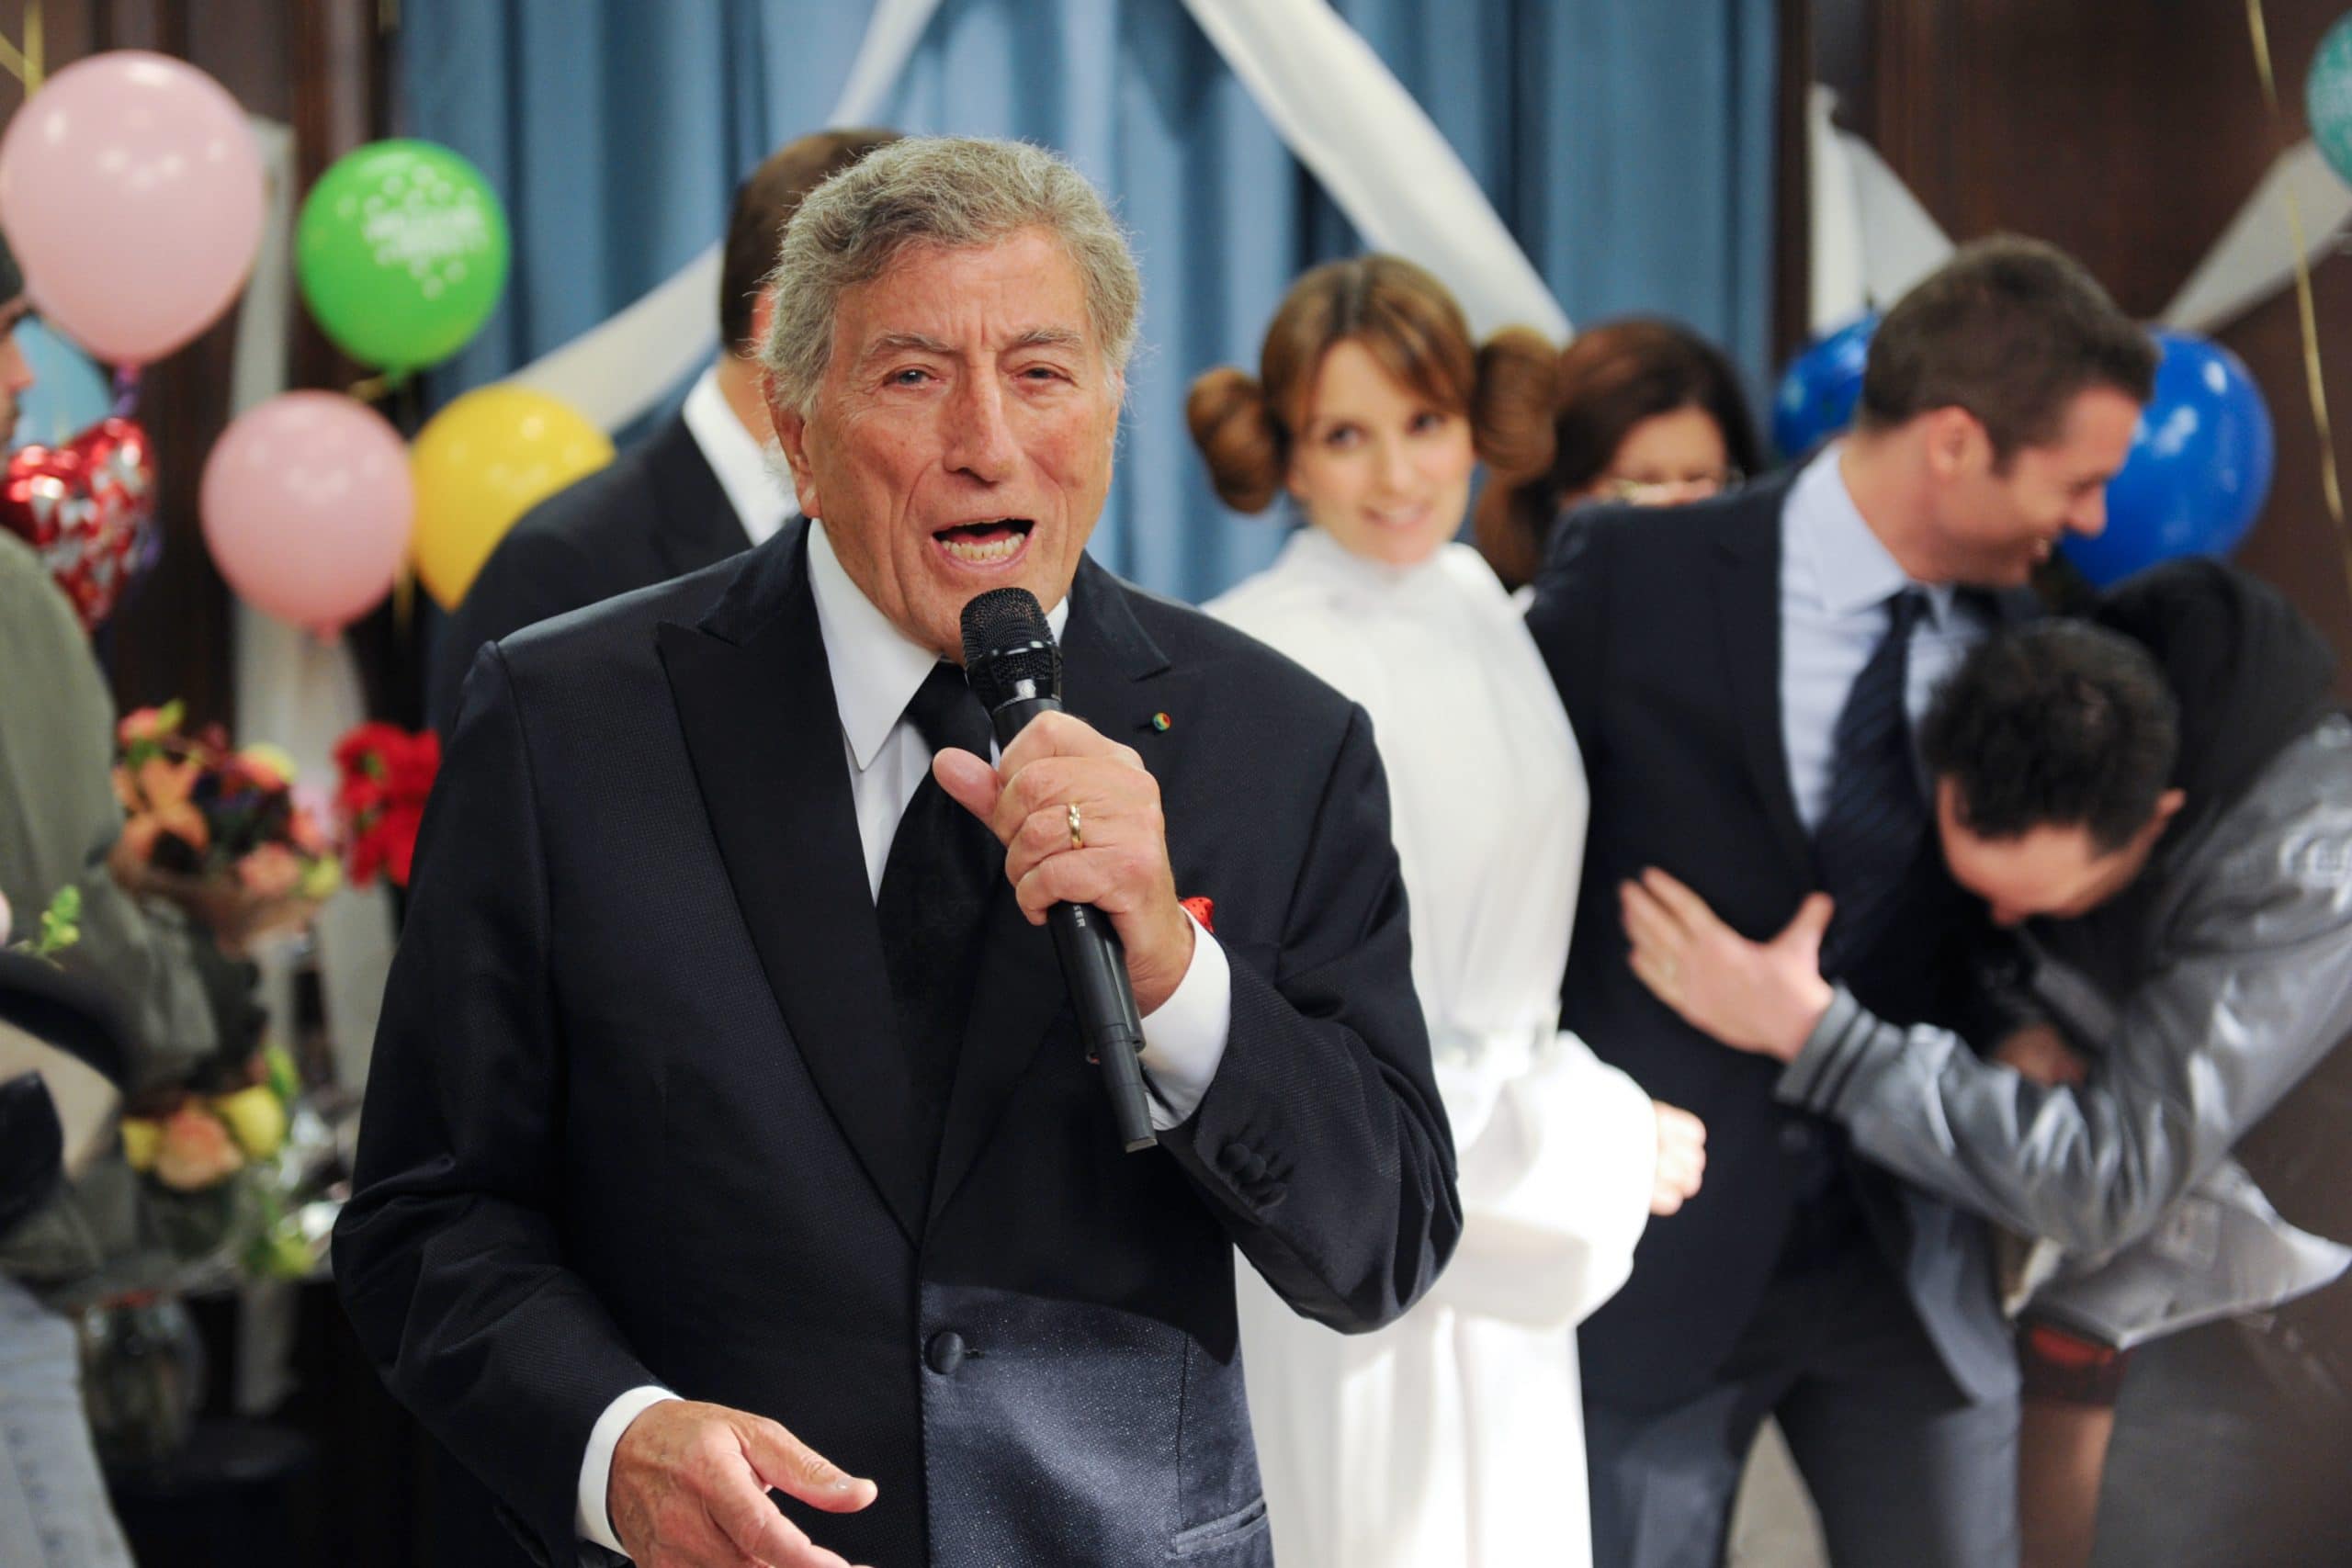 94-Year-Old Tony Bennett Has Been Diagnosed With Alzheimer's